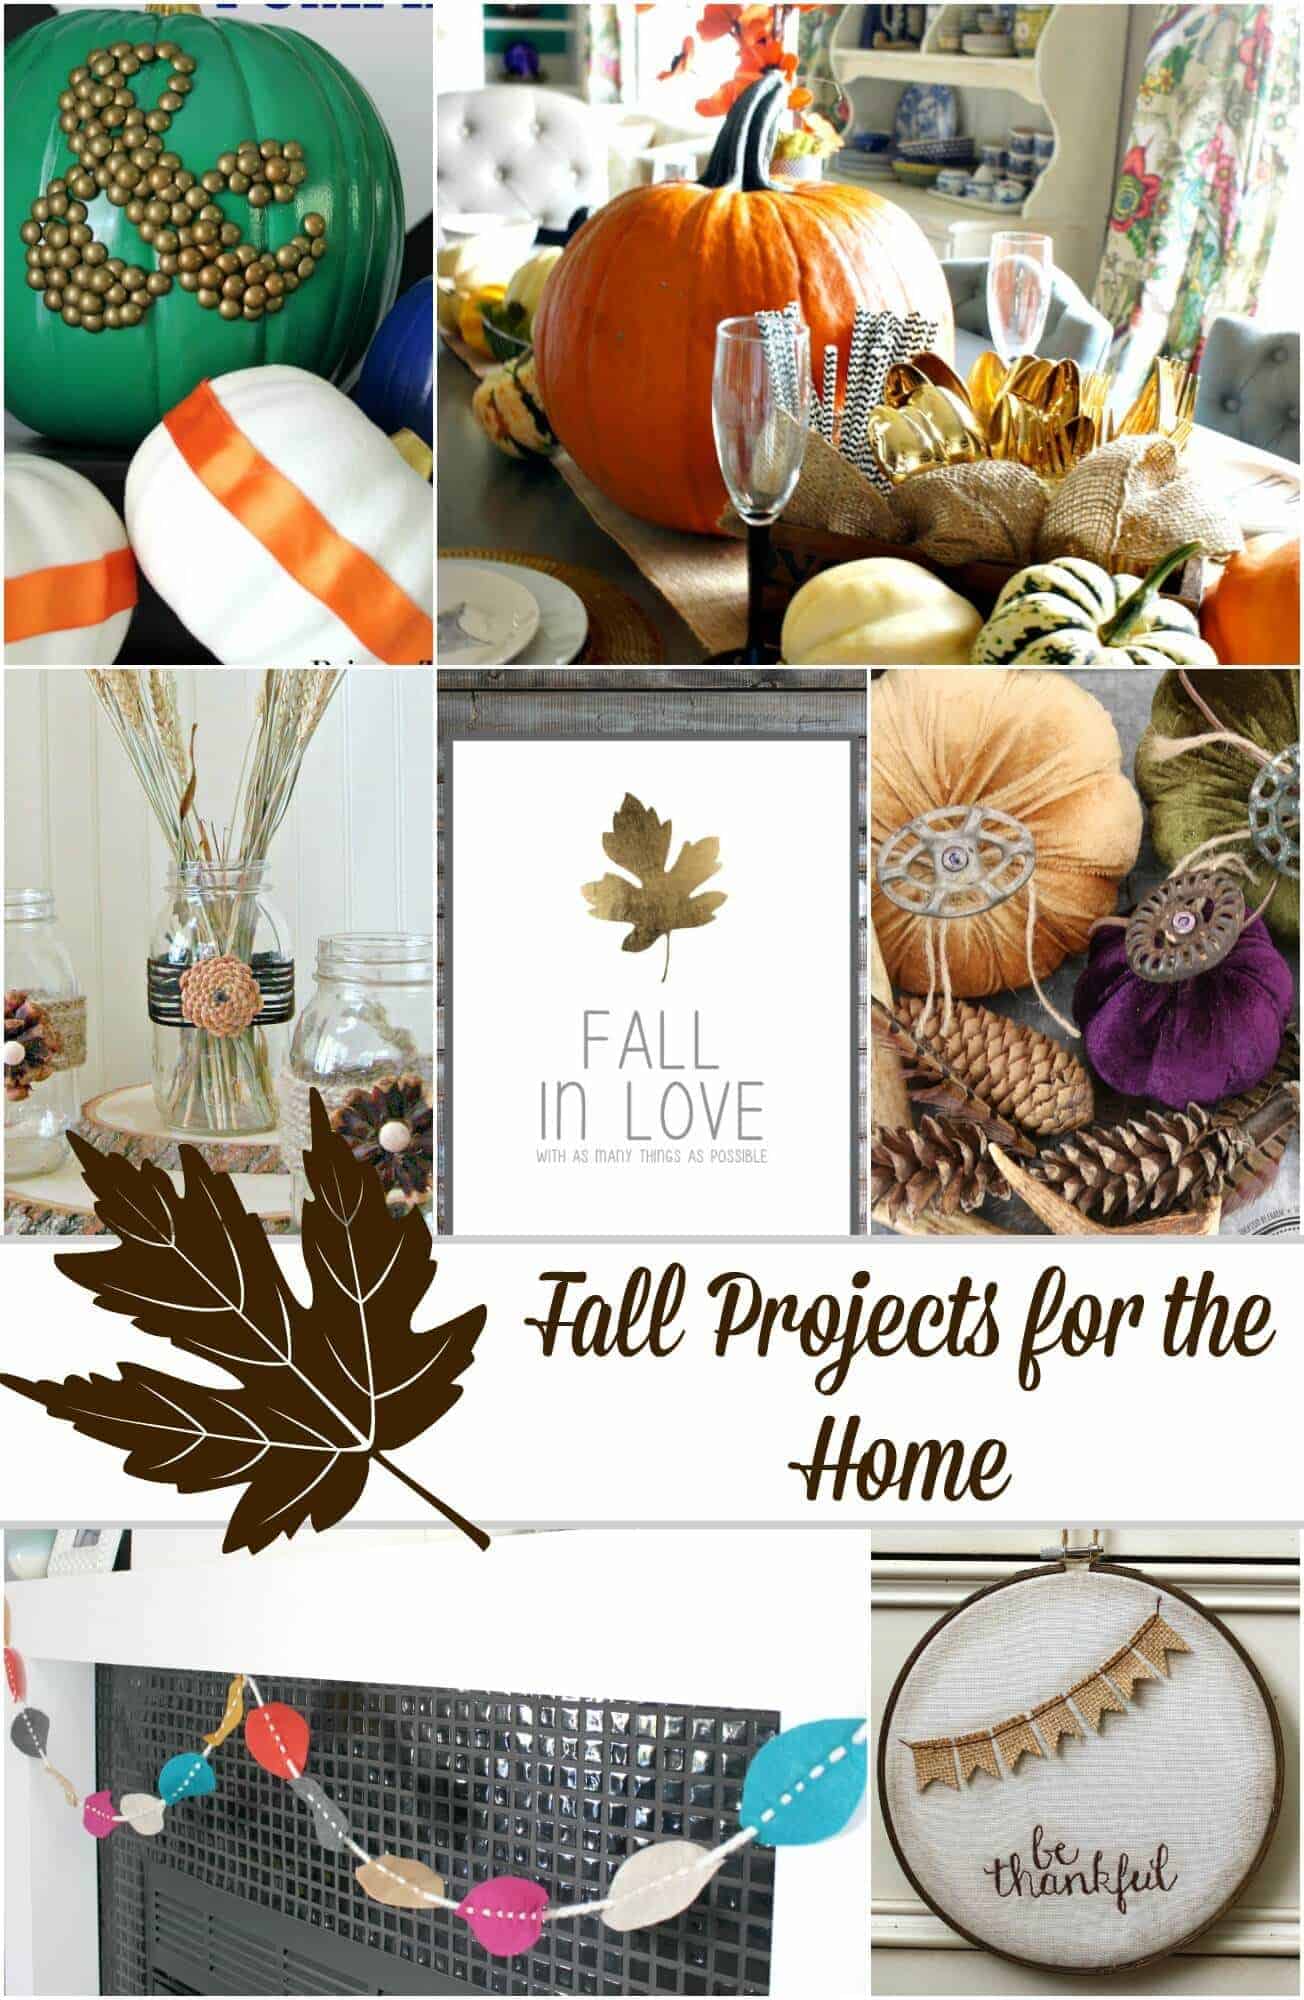 Inspiring Fall Projects for the Home - Princess Pinky Girl